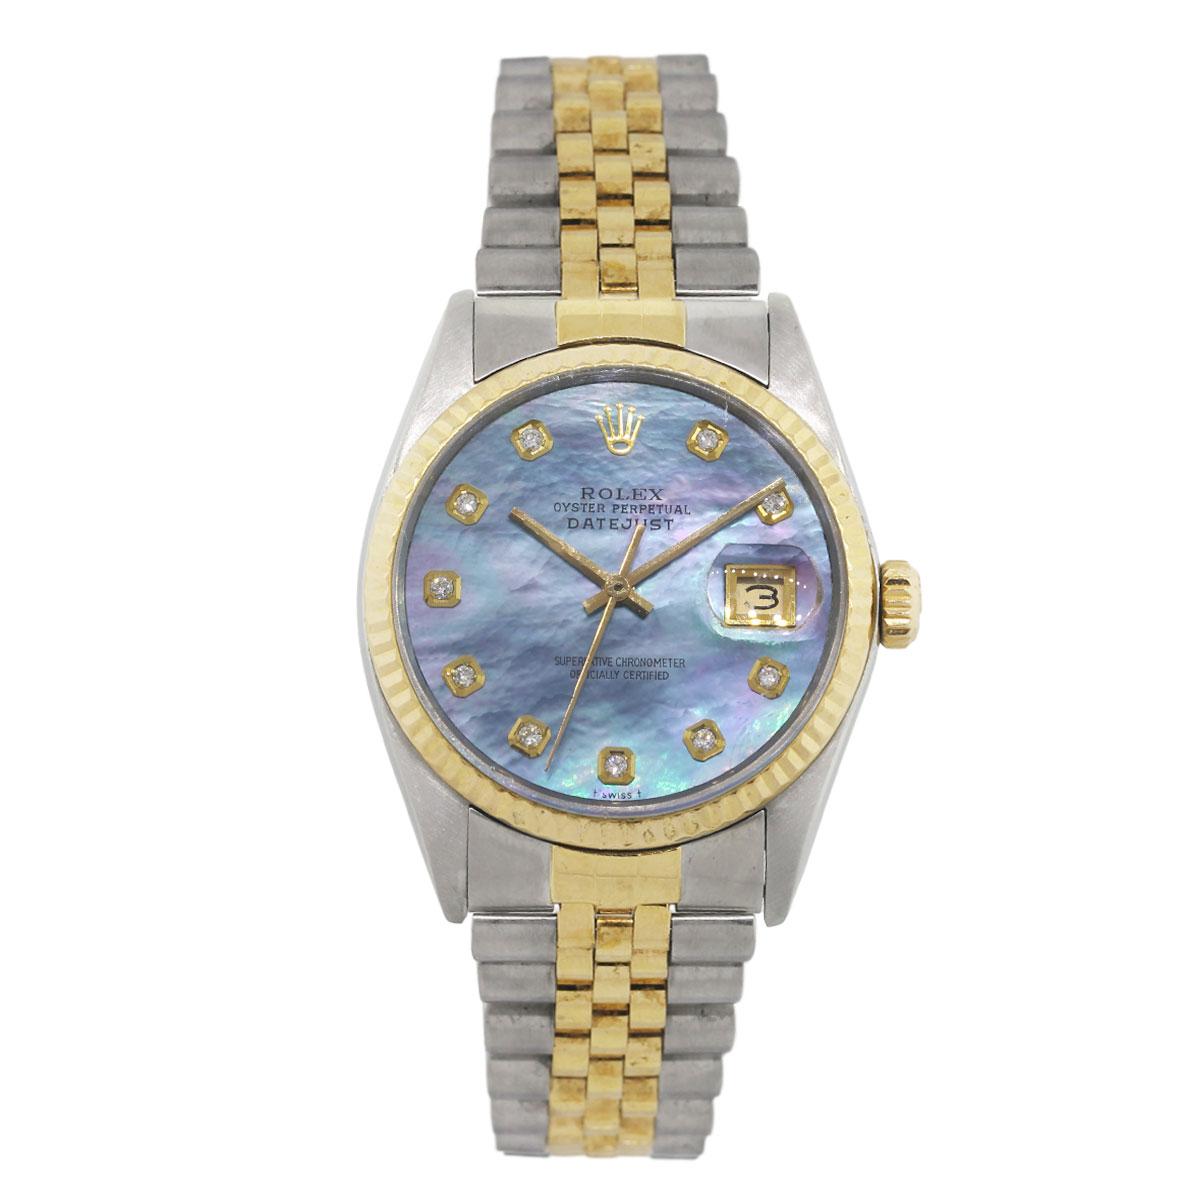 Brand: Rolex
MPN: 16013
Model: Datejust
Case Material: Stainless steel
Case Diameter: 36mm
Crystal: Sapphire crystal
Bezel: 18k yellow gold bezel
Dial: Tahitian mother of pearl diamond dial (aftermarket)
Bracelet: 18k yellow gold and stainless steel